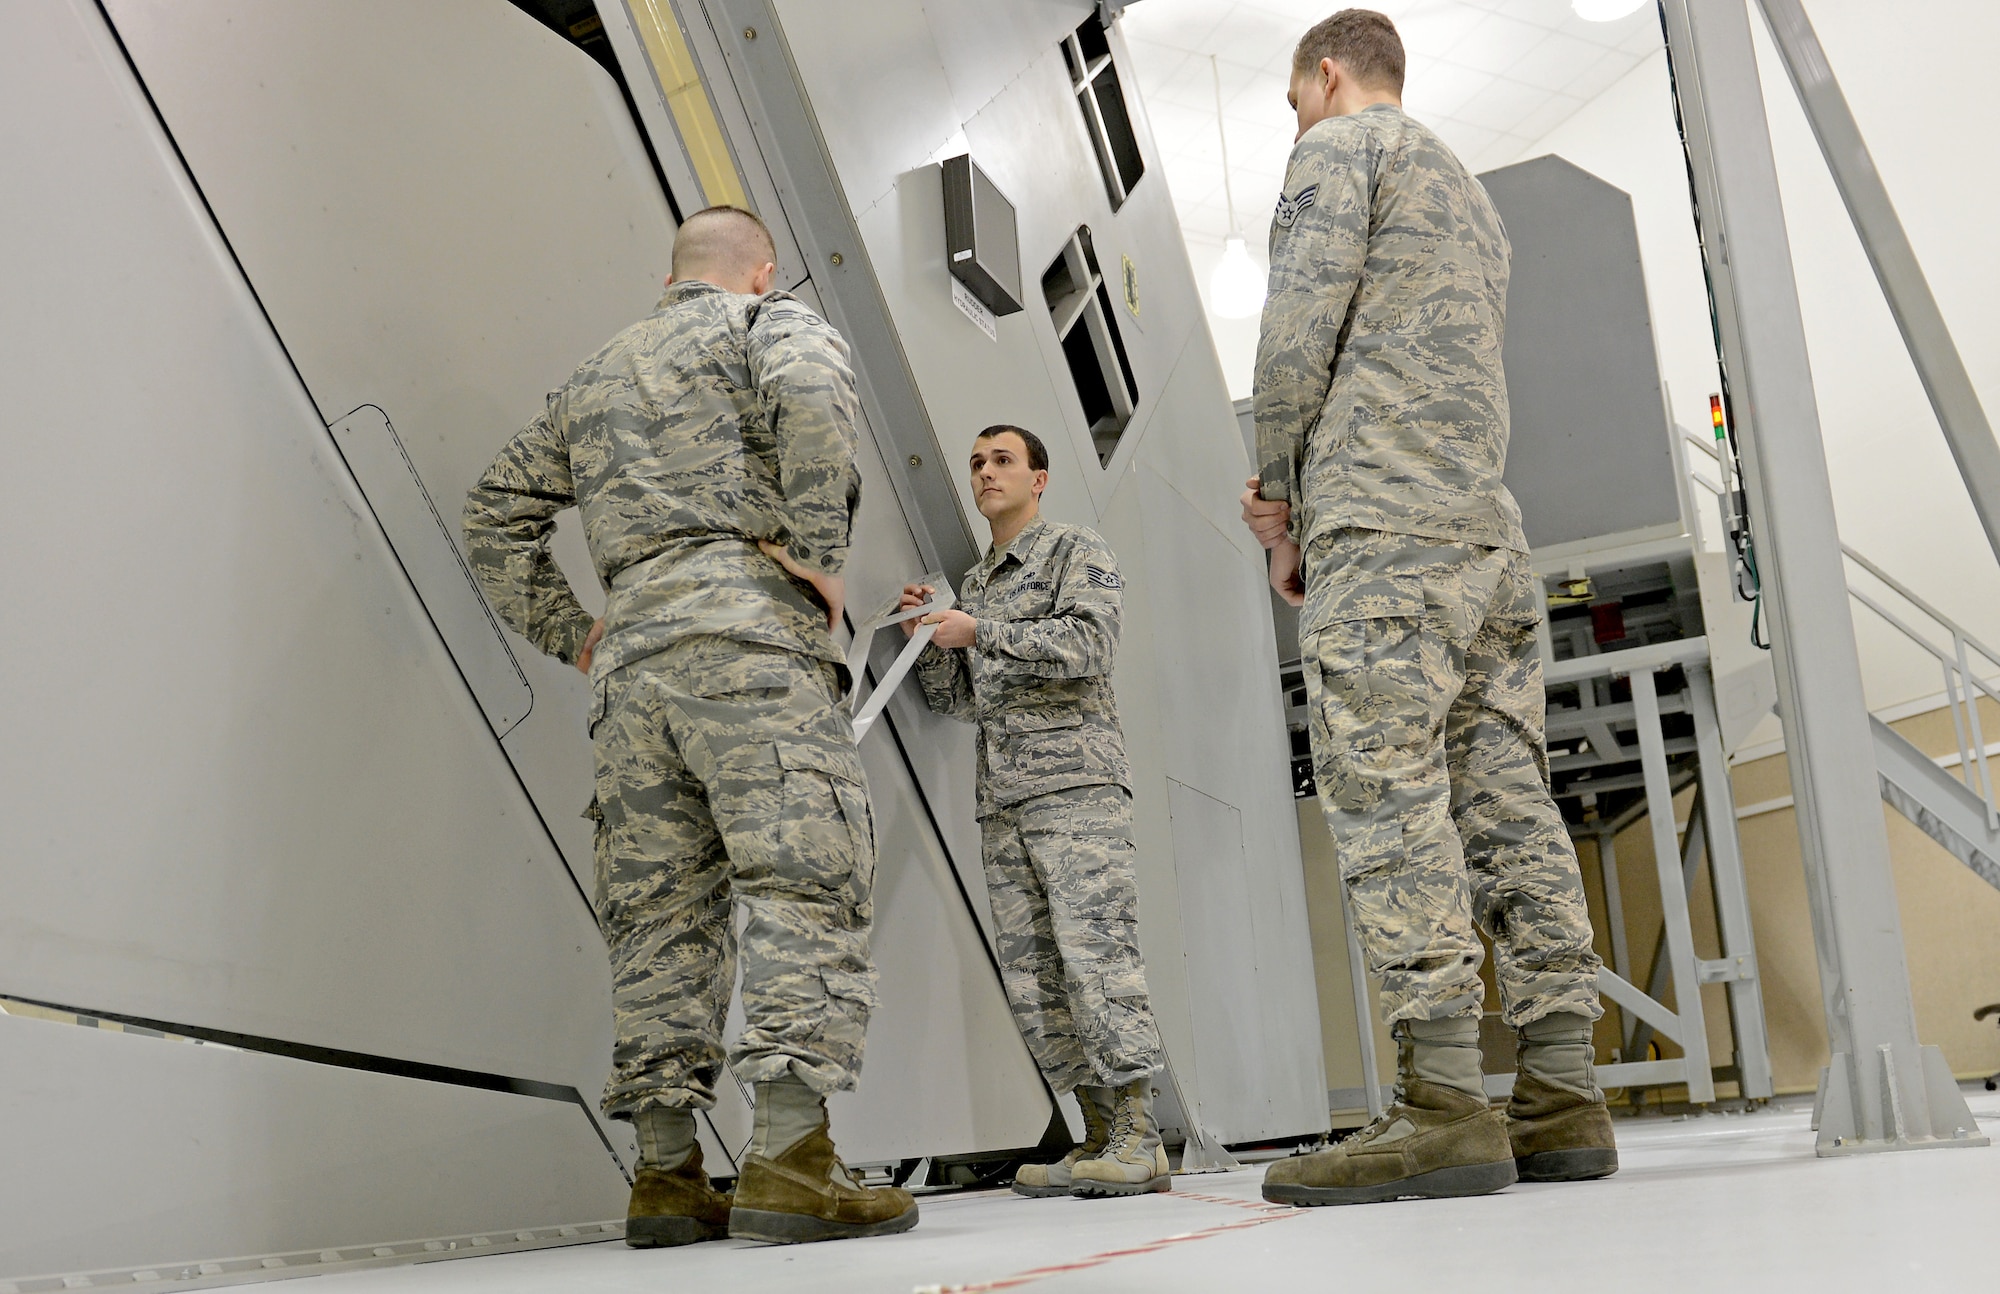 Staff Sgt. Kyle Stringer (middle), 373rd Training Squadron field training detachment instructor, provides advance C-17 Globemaster III training to Senior Airman Shawn Carnline (left), 62nd Aircraft Maintenance crew chief, and SrA Caleb Day (right), 62nd AMXS crew chief, Jan. 19, 2017 at Joint Base Lewis McChord, Wash. The 373rd TRS is part of the Air Education and Training Command that is geographically separated from the 82nd Training Group at Sheppard Air Force Base, Texas that focuses on three different types of aircraft maintenance courses. (U.S. Air Force photo/Senior Airman Divine Cox)